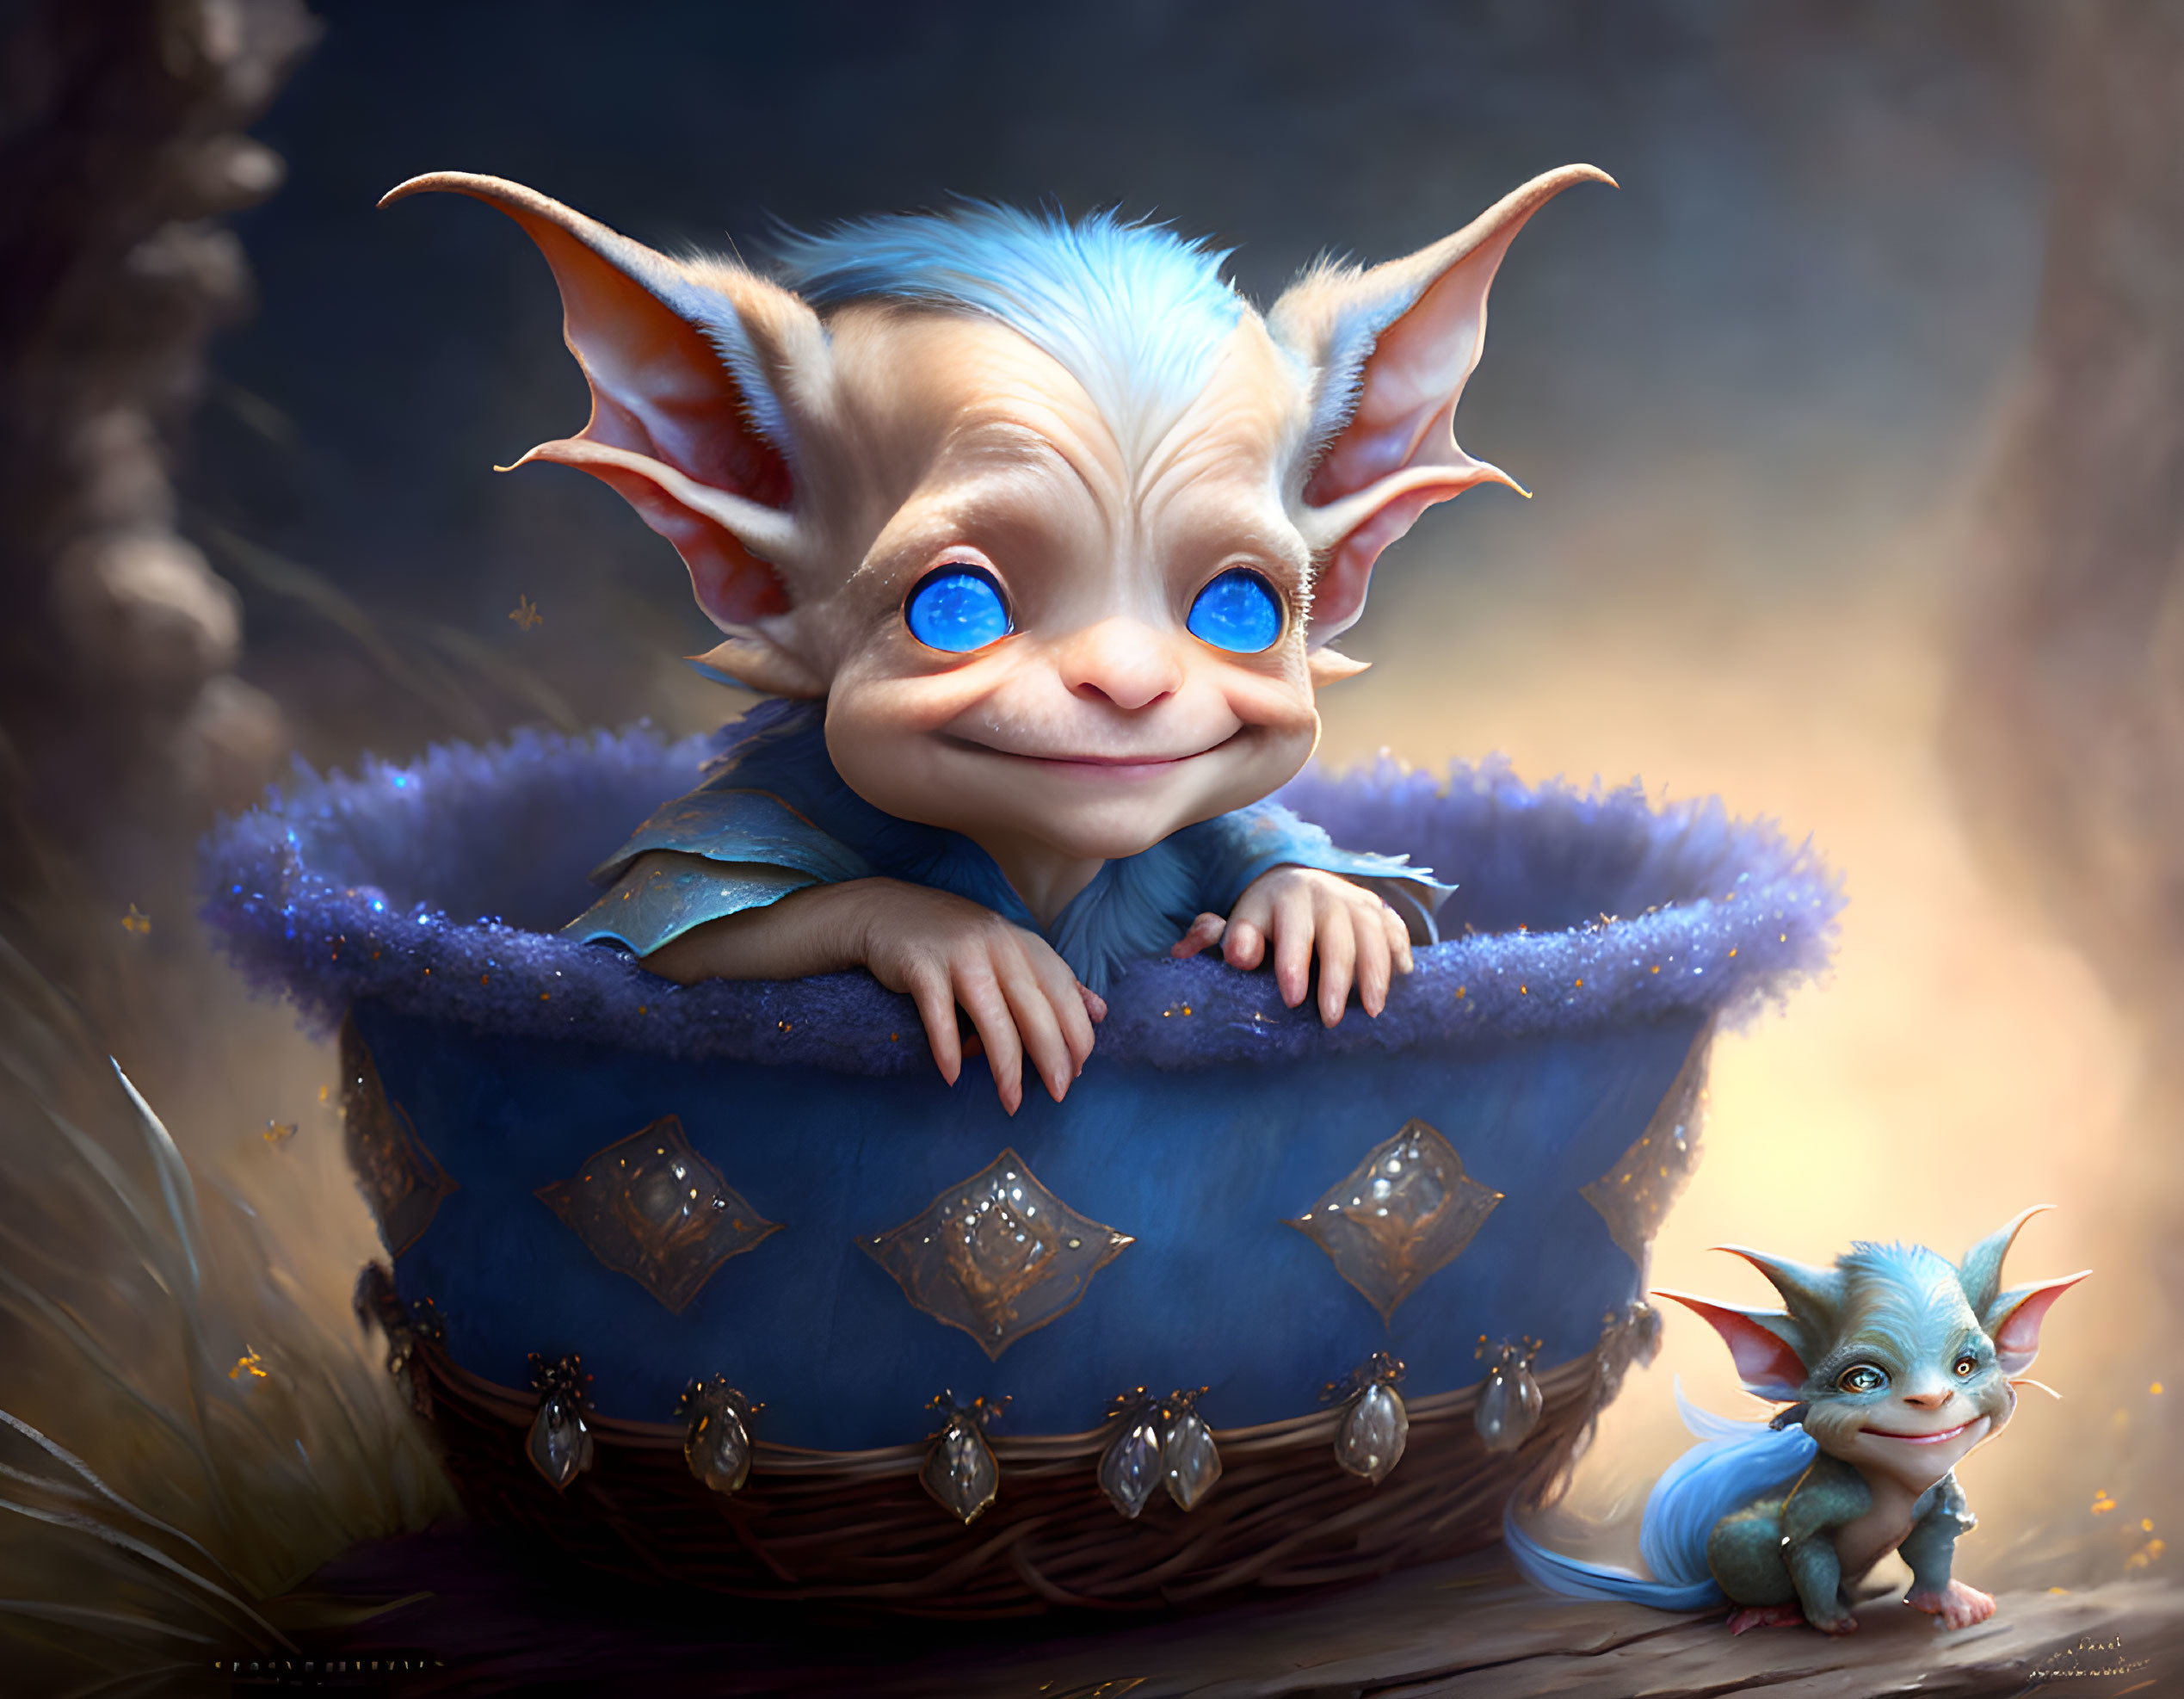 Illustration of cute, blue-eyed gremlin-like creatures in magical forest.